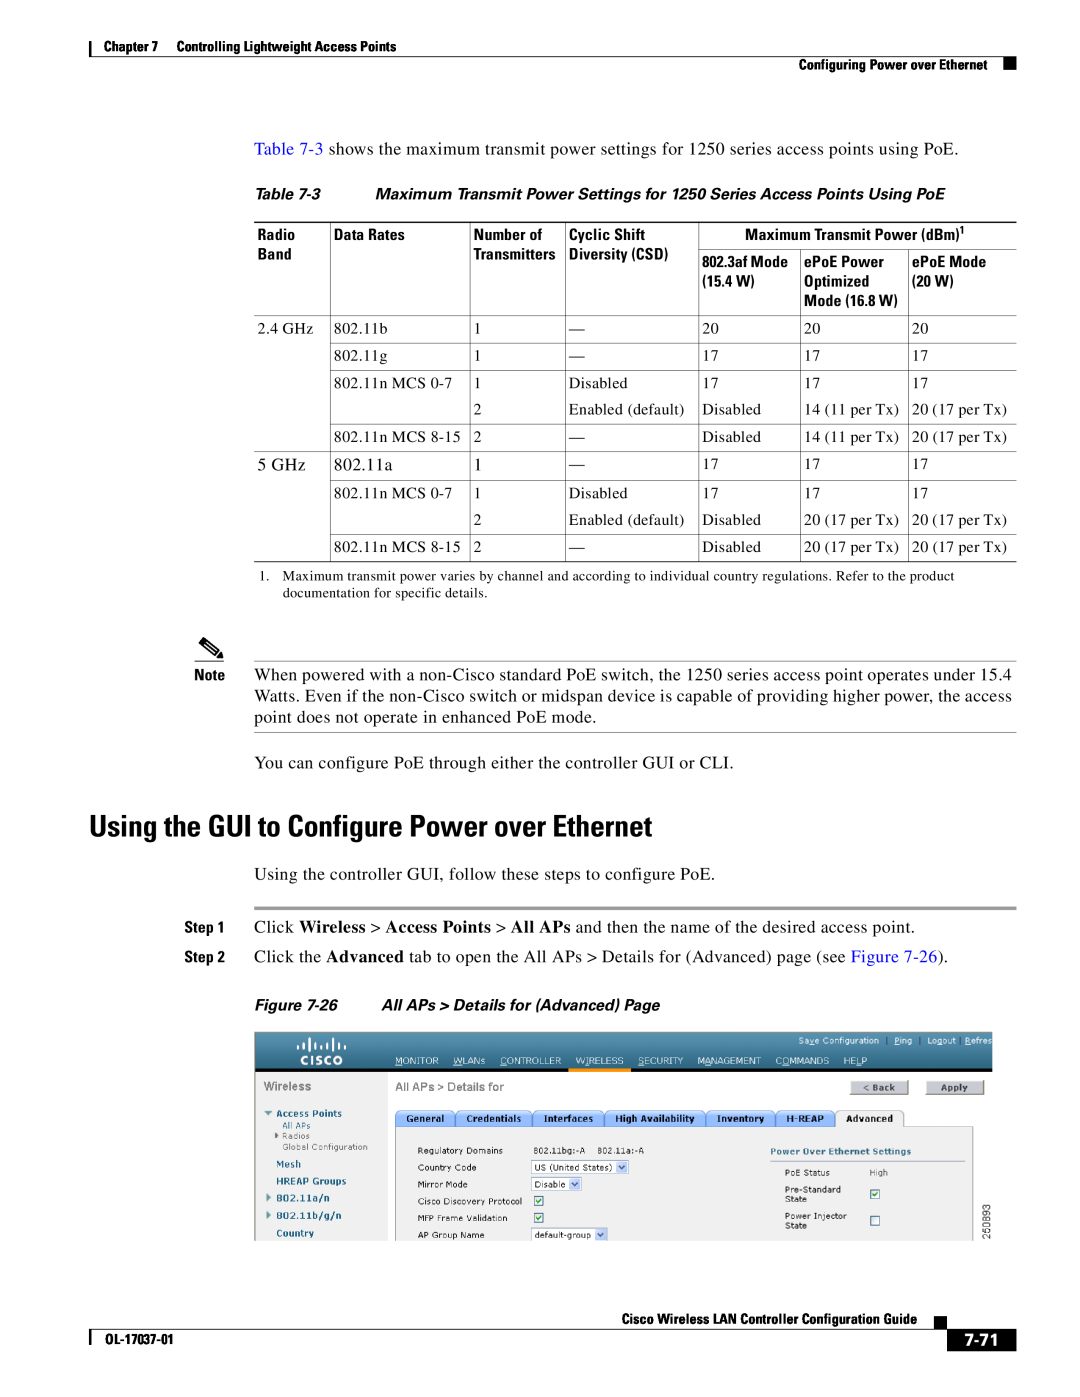 Cisco Systems OL-17037-01 manual Using the GUI to Configure Power over Ethernet, 7-71 